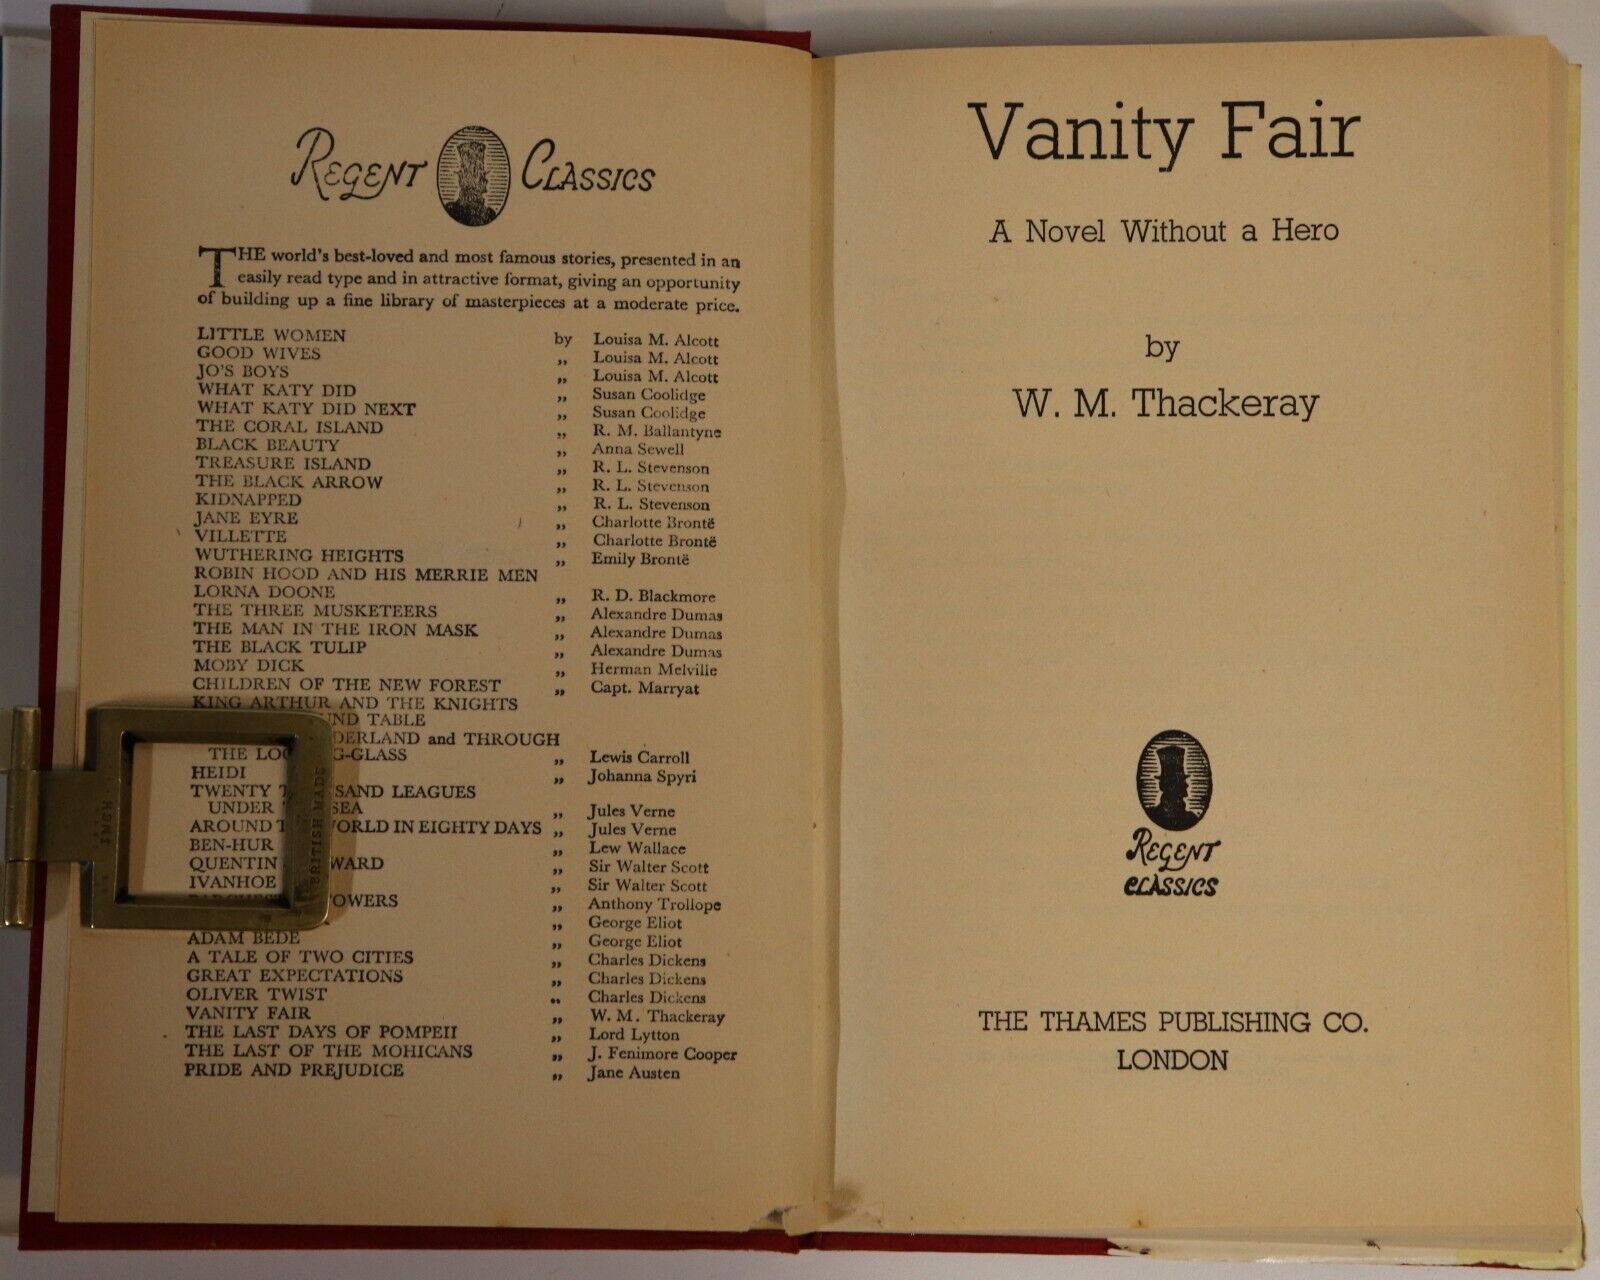 Vanity Fair by William Makepeace Thackeray - c1960 - Vintage Fiction Book - 0